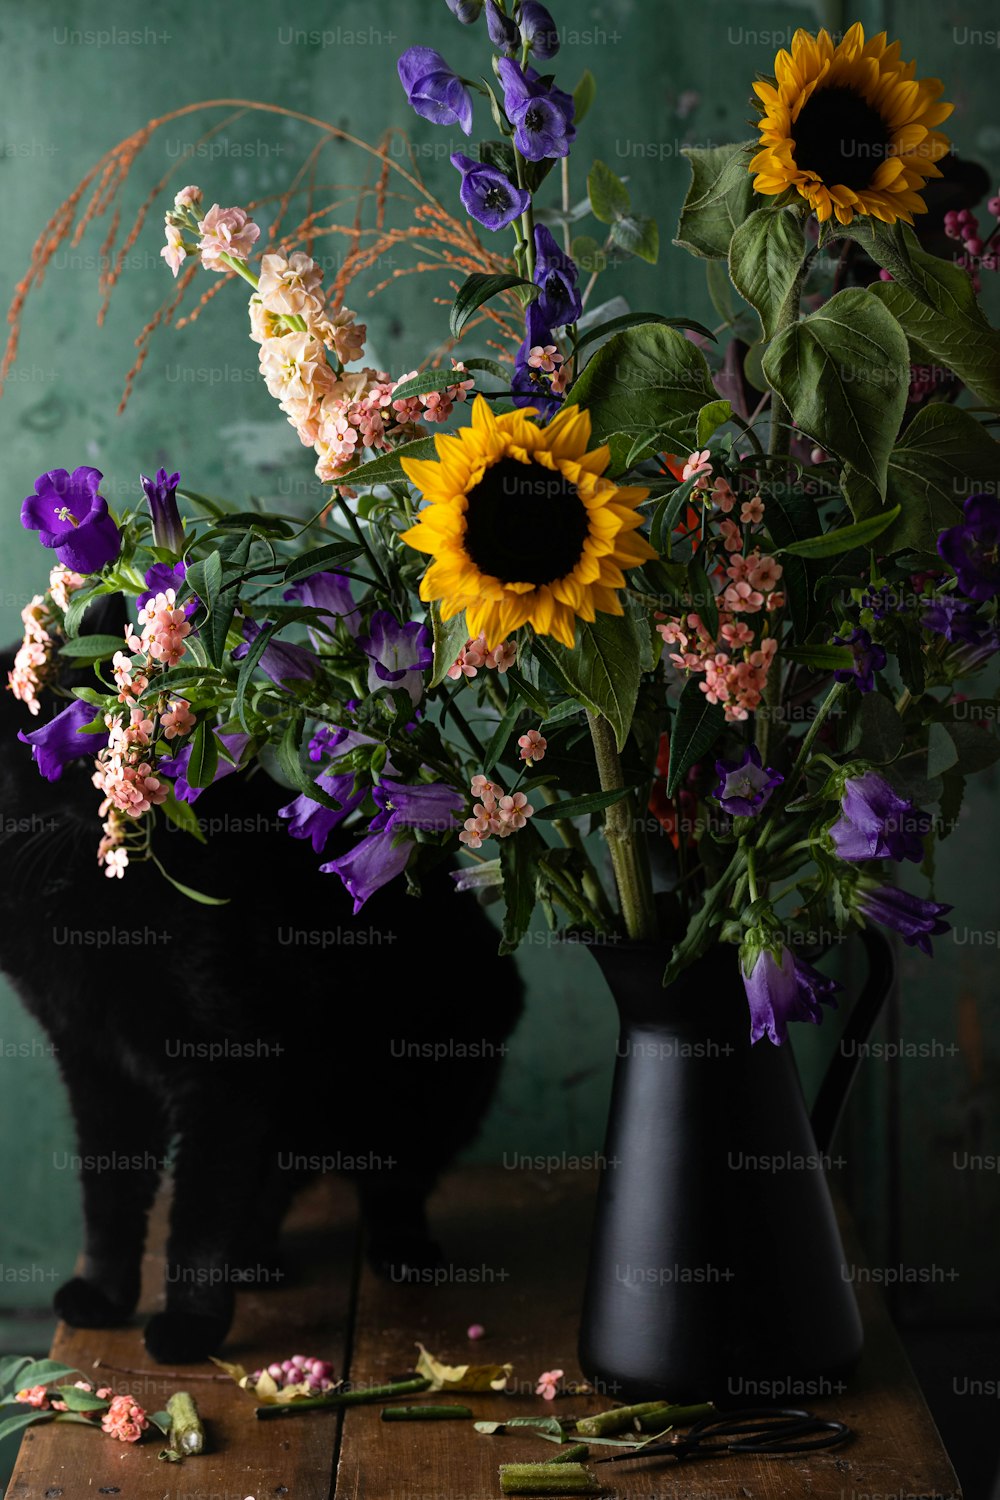 a black cat standing next to a vase of flowers